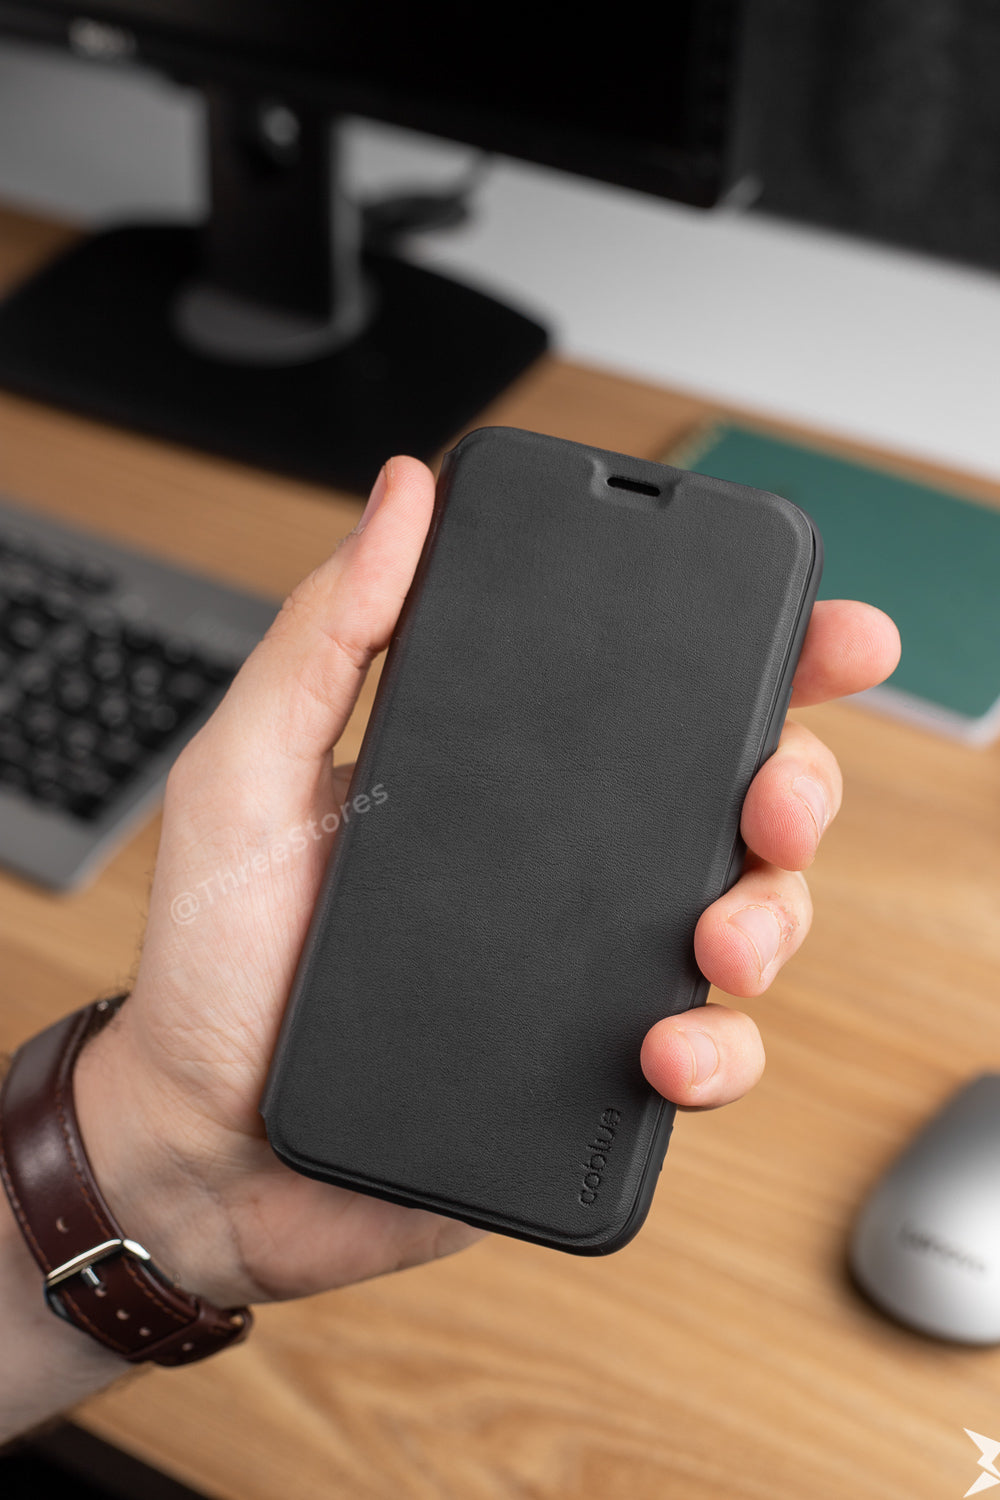 Coblue Leather 360 Ultra Thin Case iPhone X Max